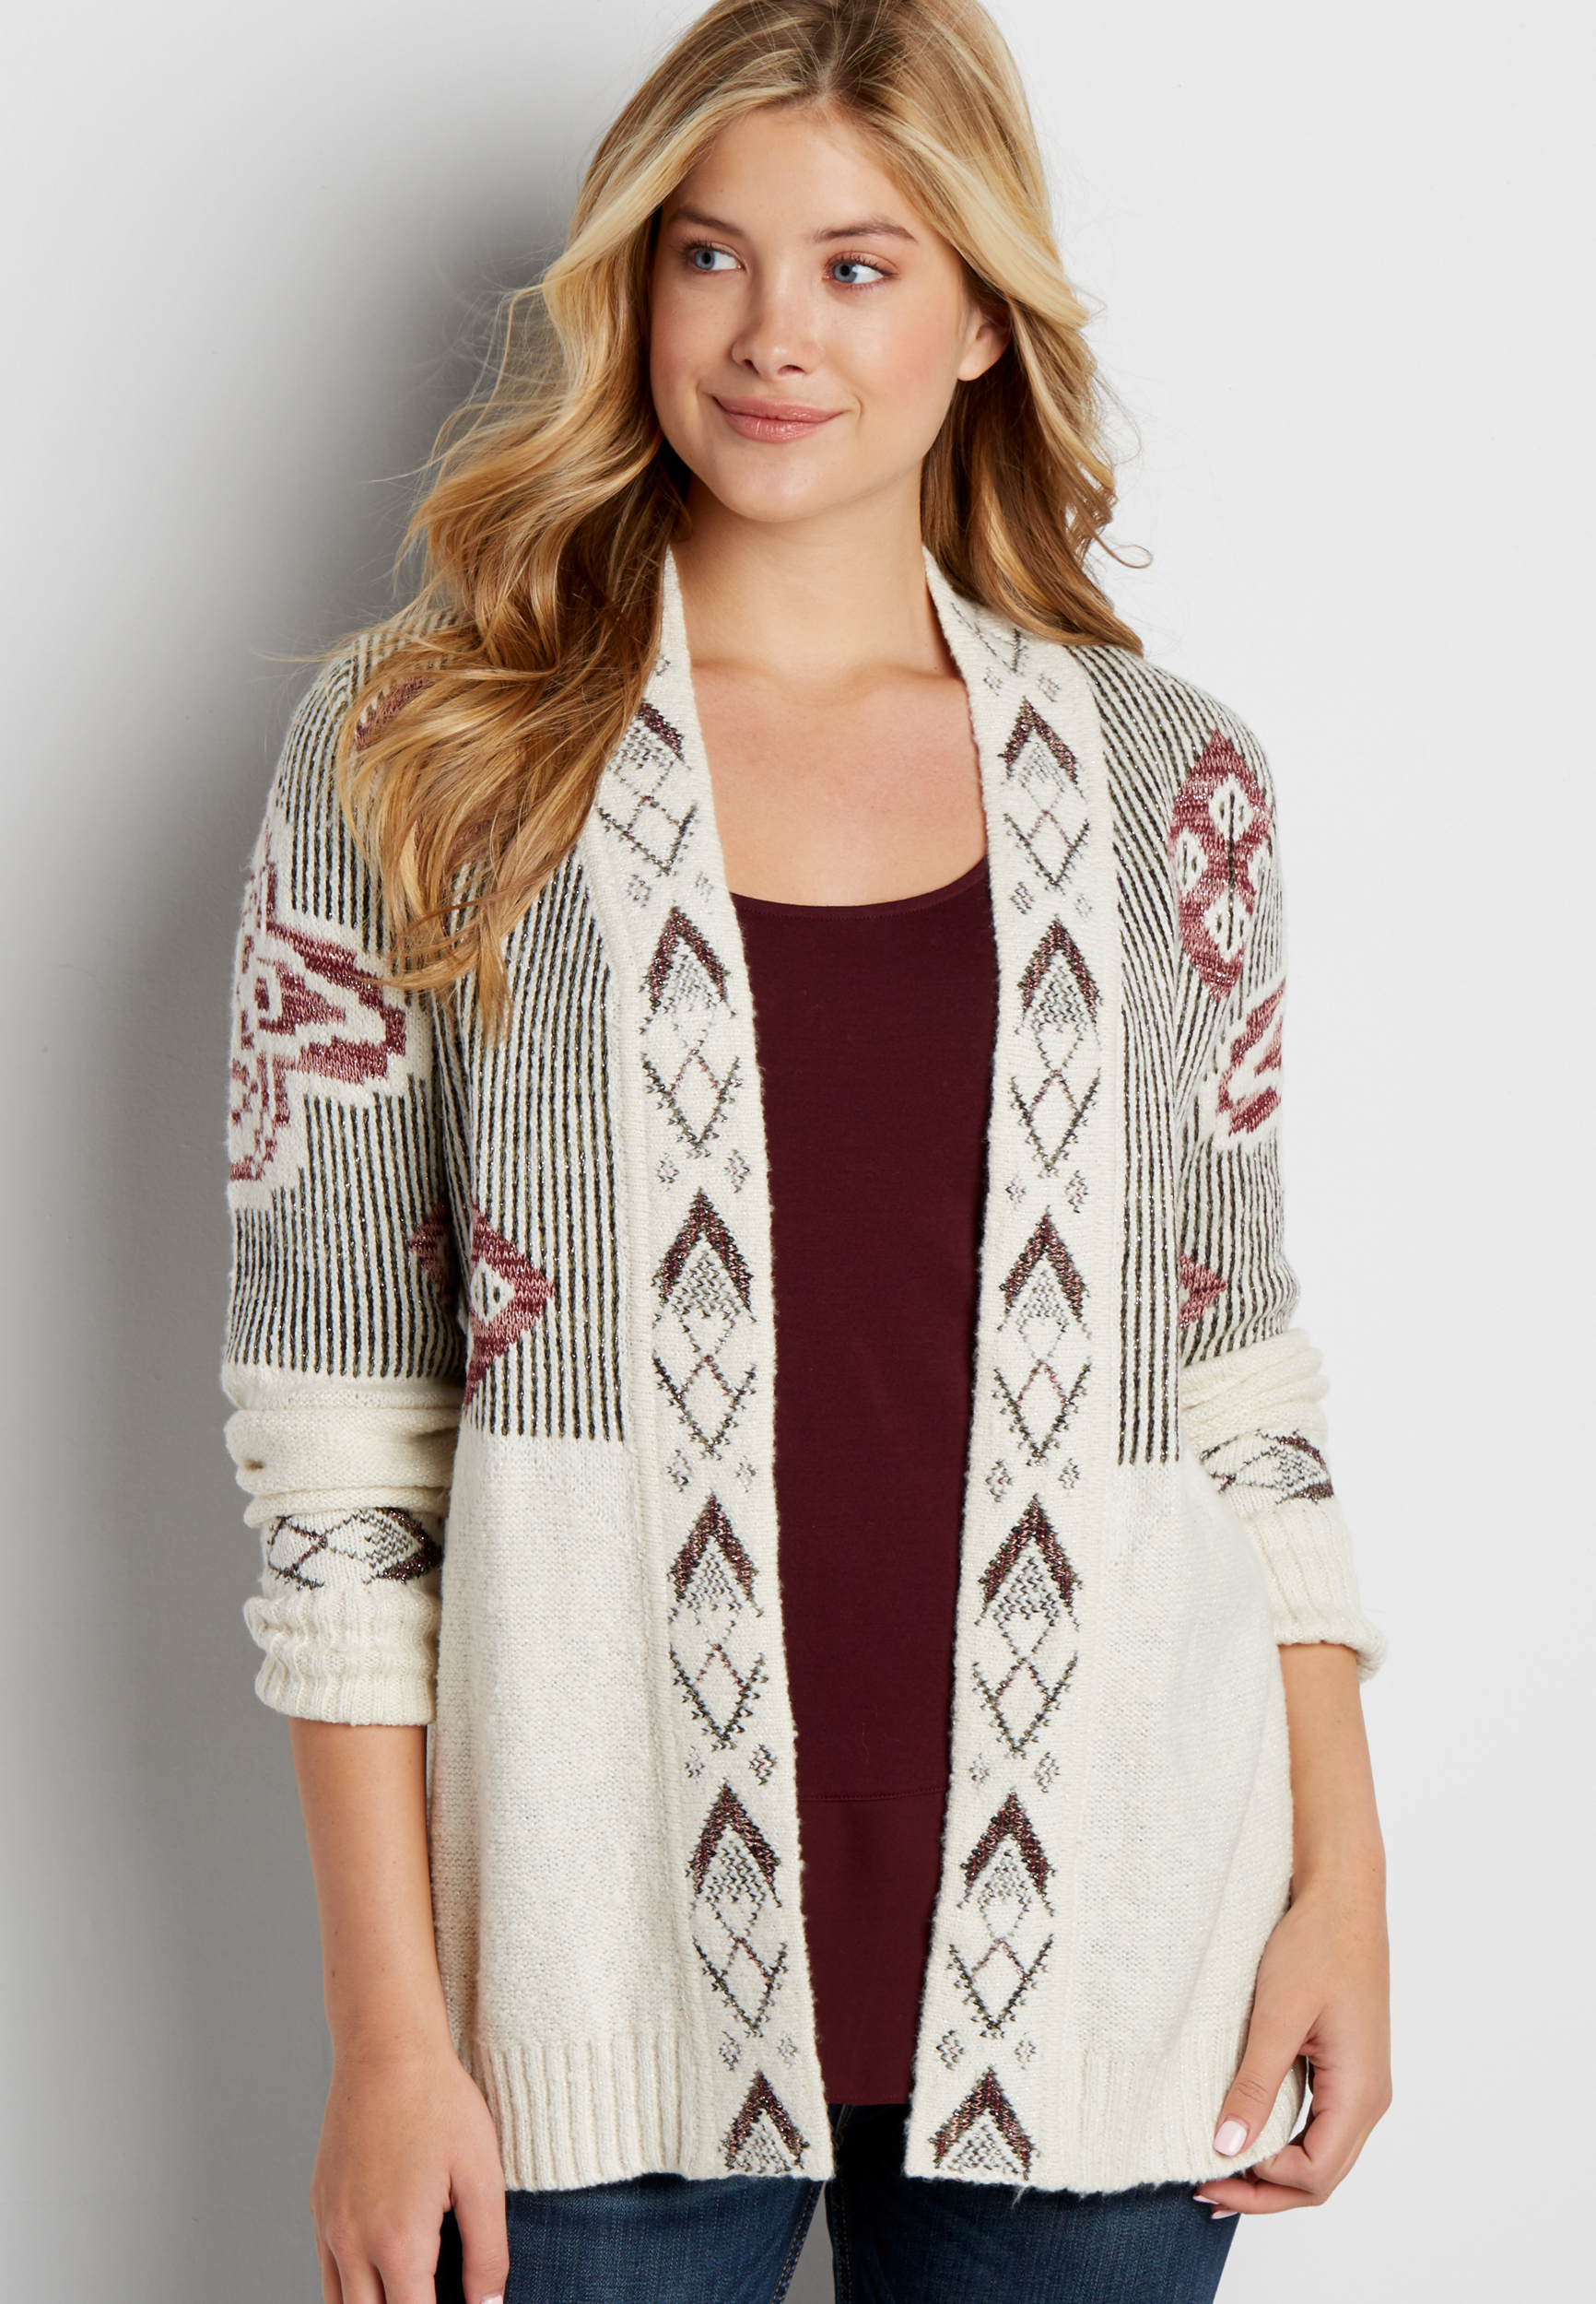 cardigan with ethnic design and metallic stitching | maurices